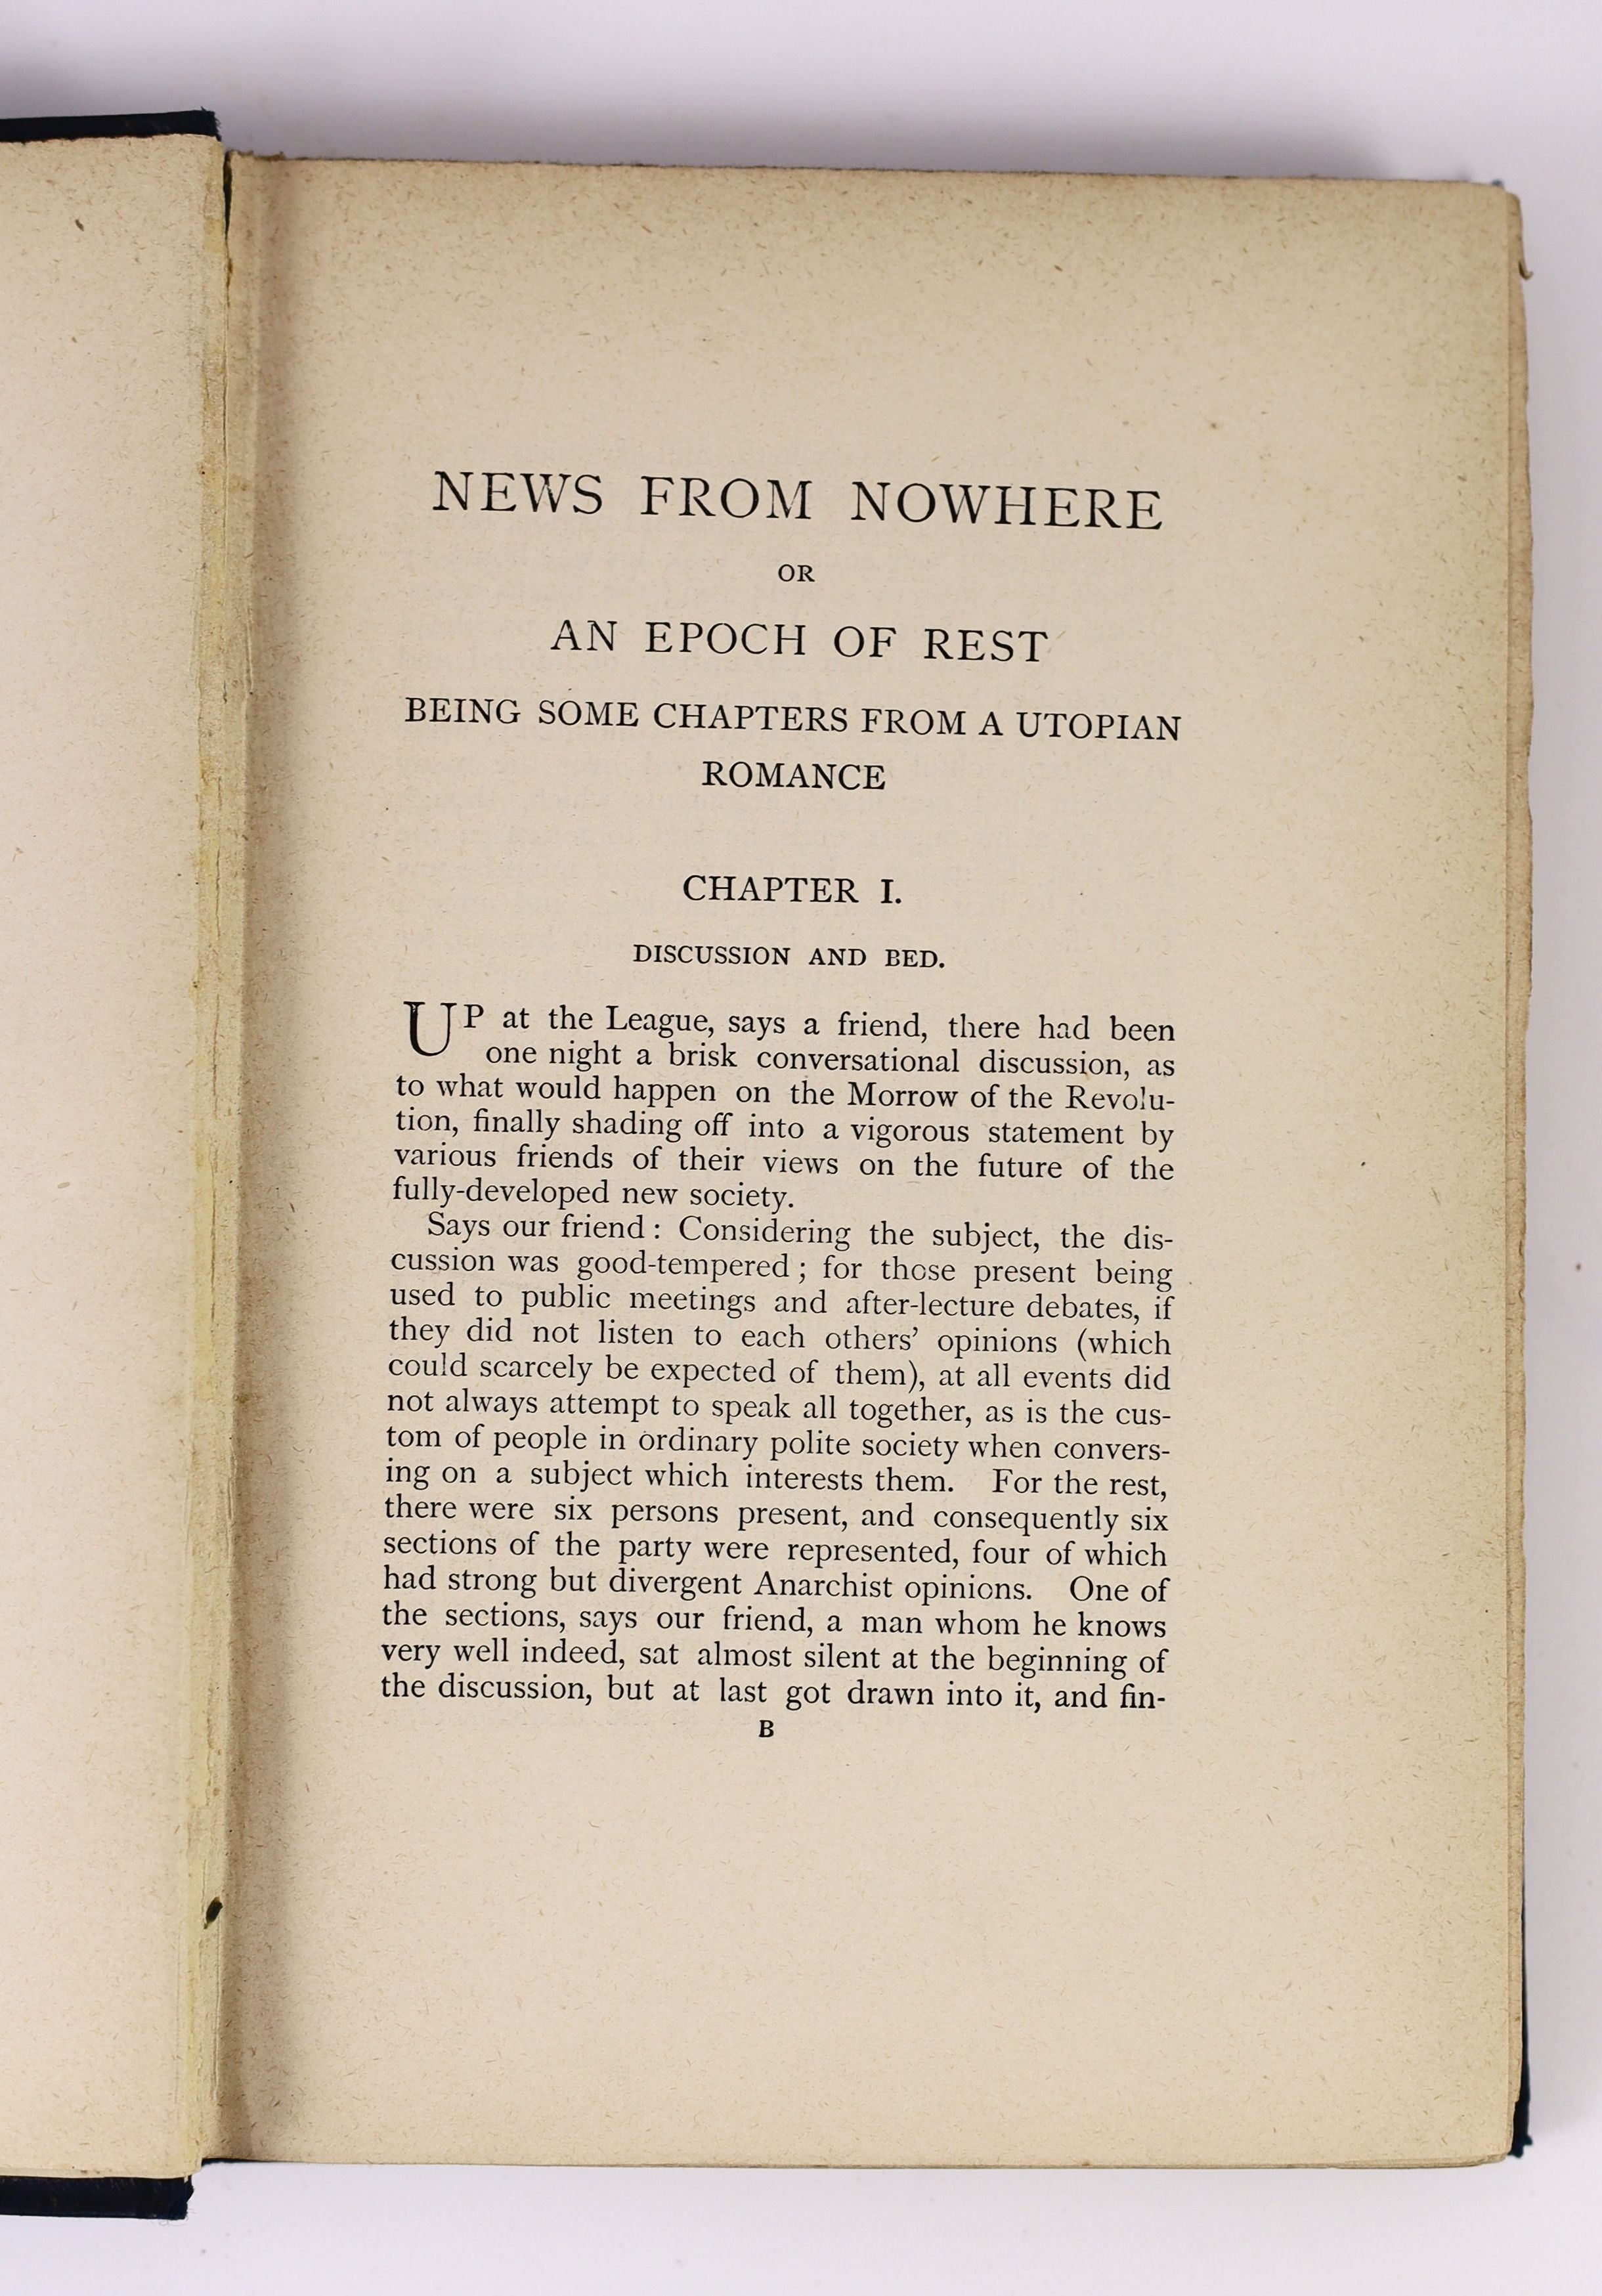 Socialism. - Utopia - Morris, William - News From Nowhere: or, An Epoch of Rest, being some chapters from a Utopian Romance, 1st edition in book form, 8vo, black cloth, gilt titling, Reeves & Turner, London, 1891